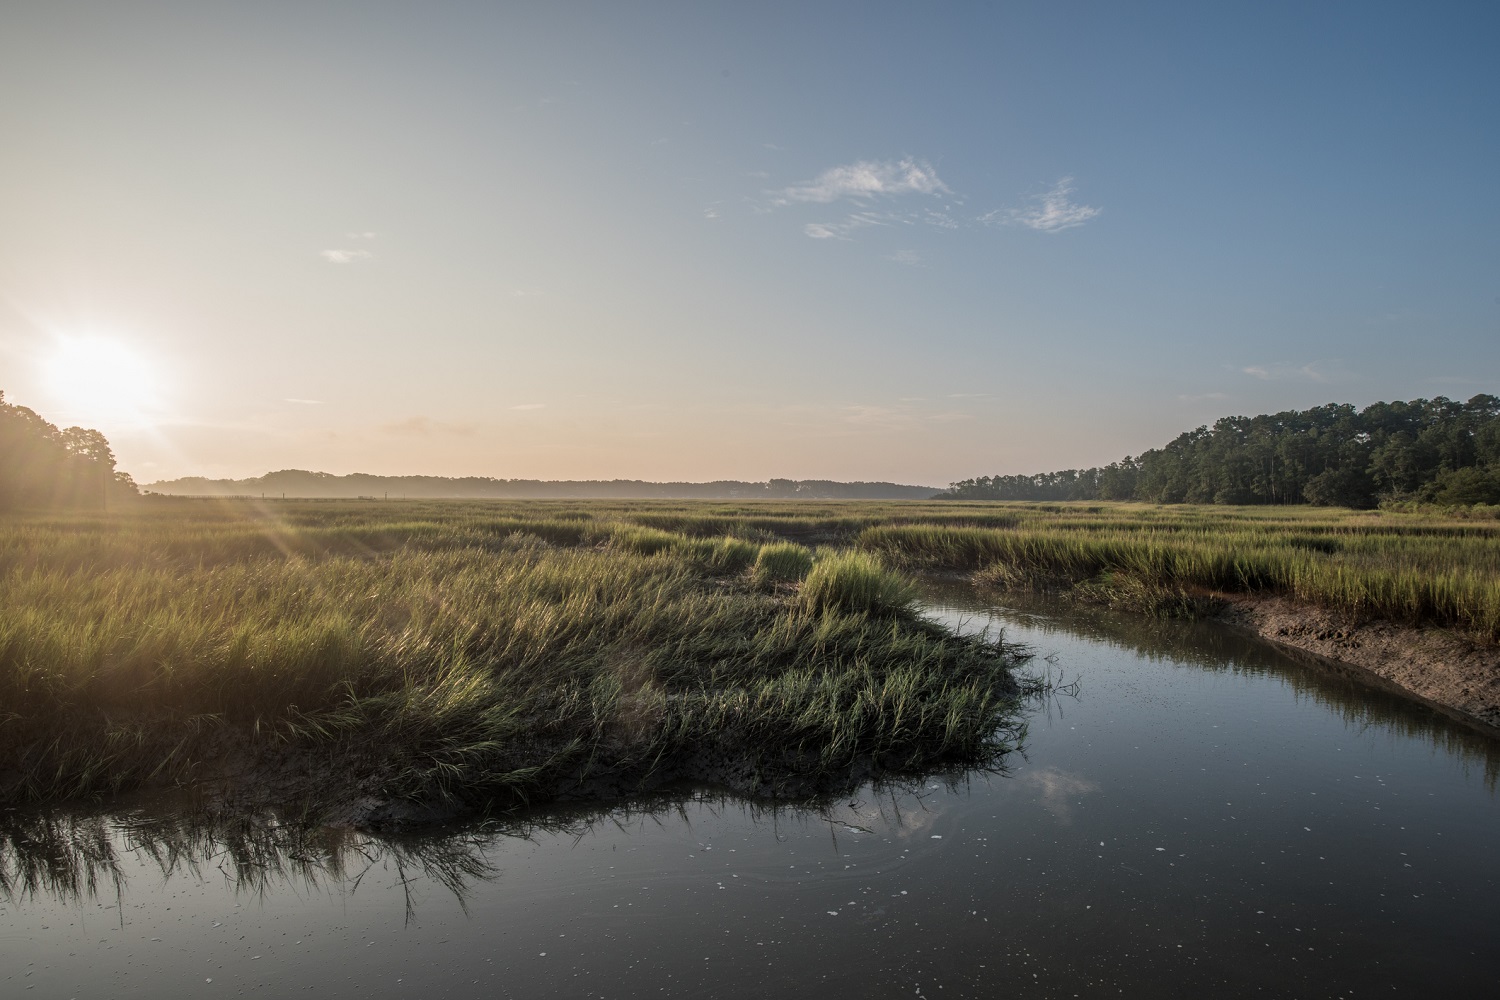 Discover our favorite things to do on Kiawah Island.